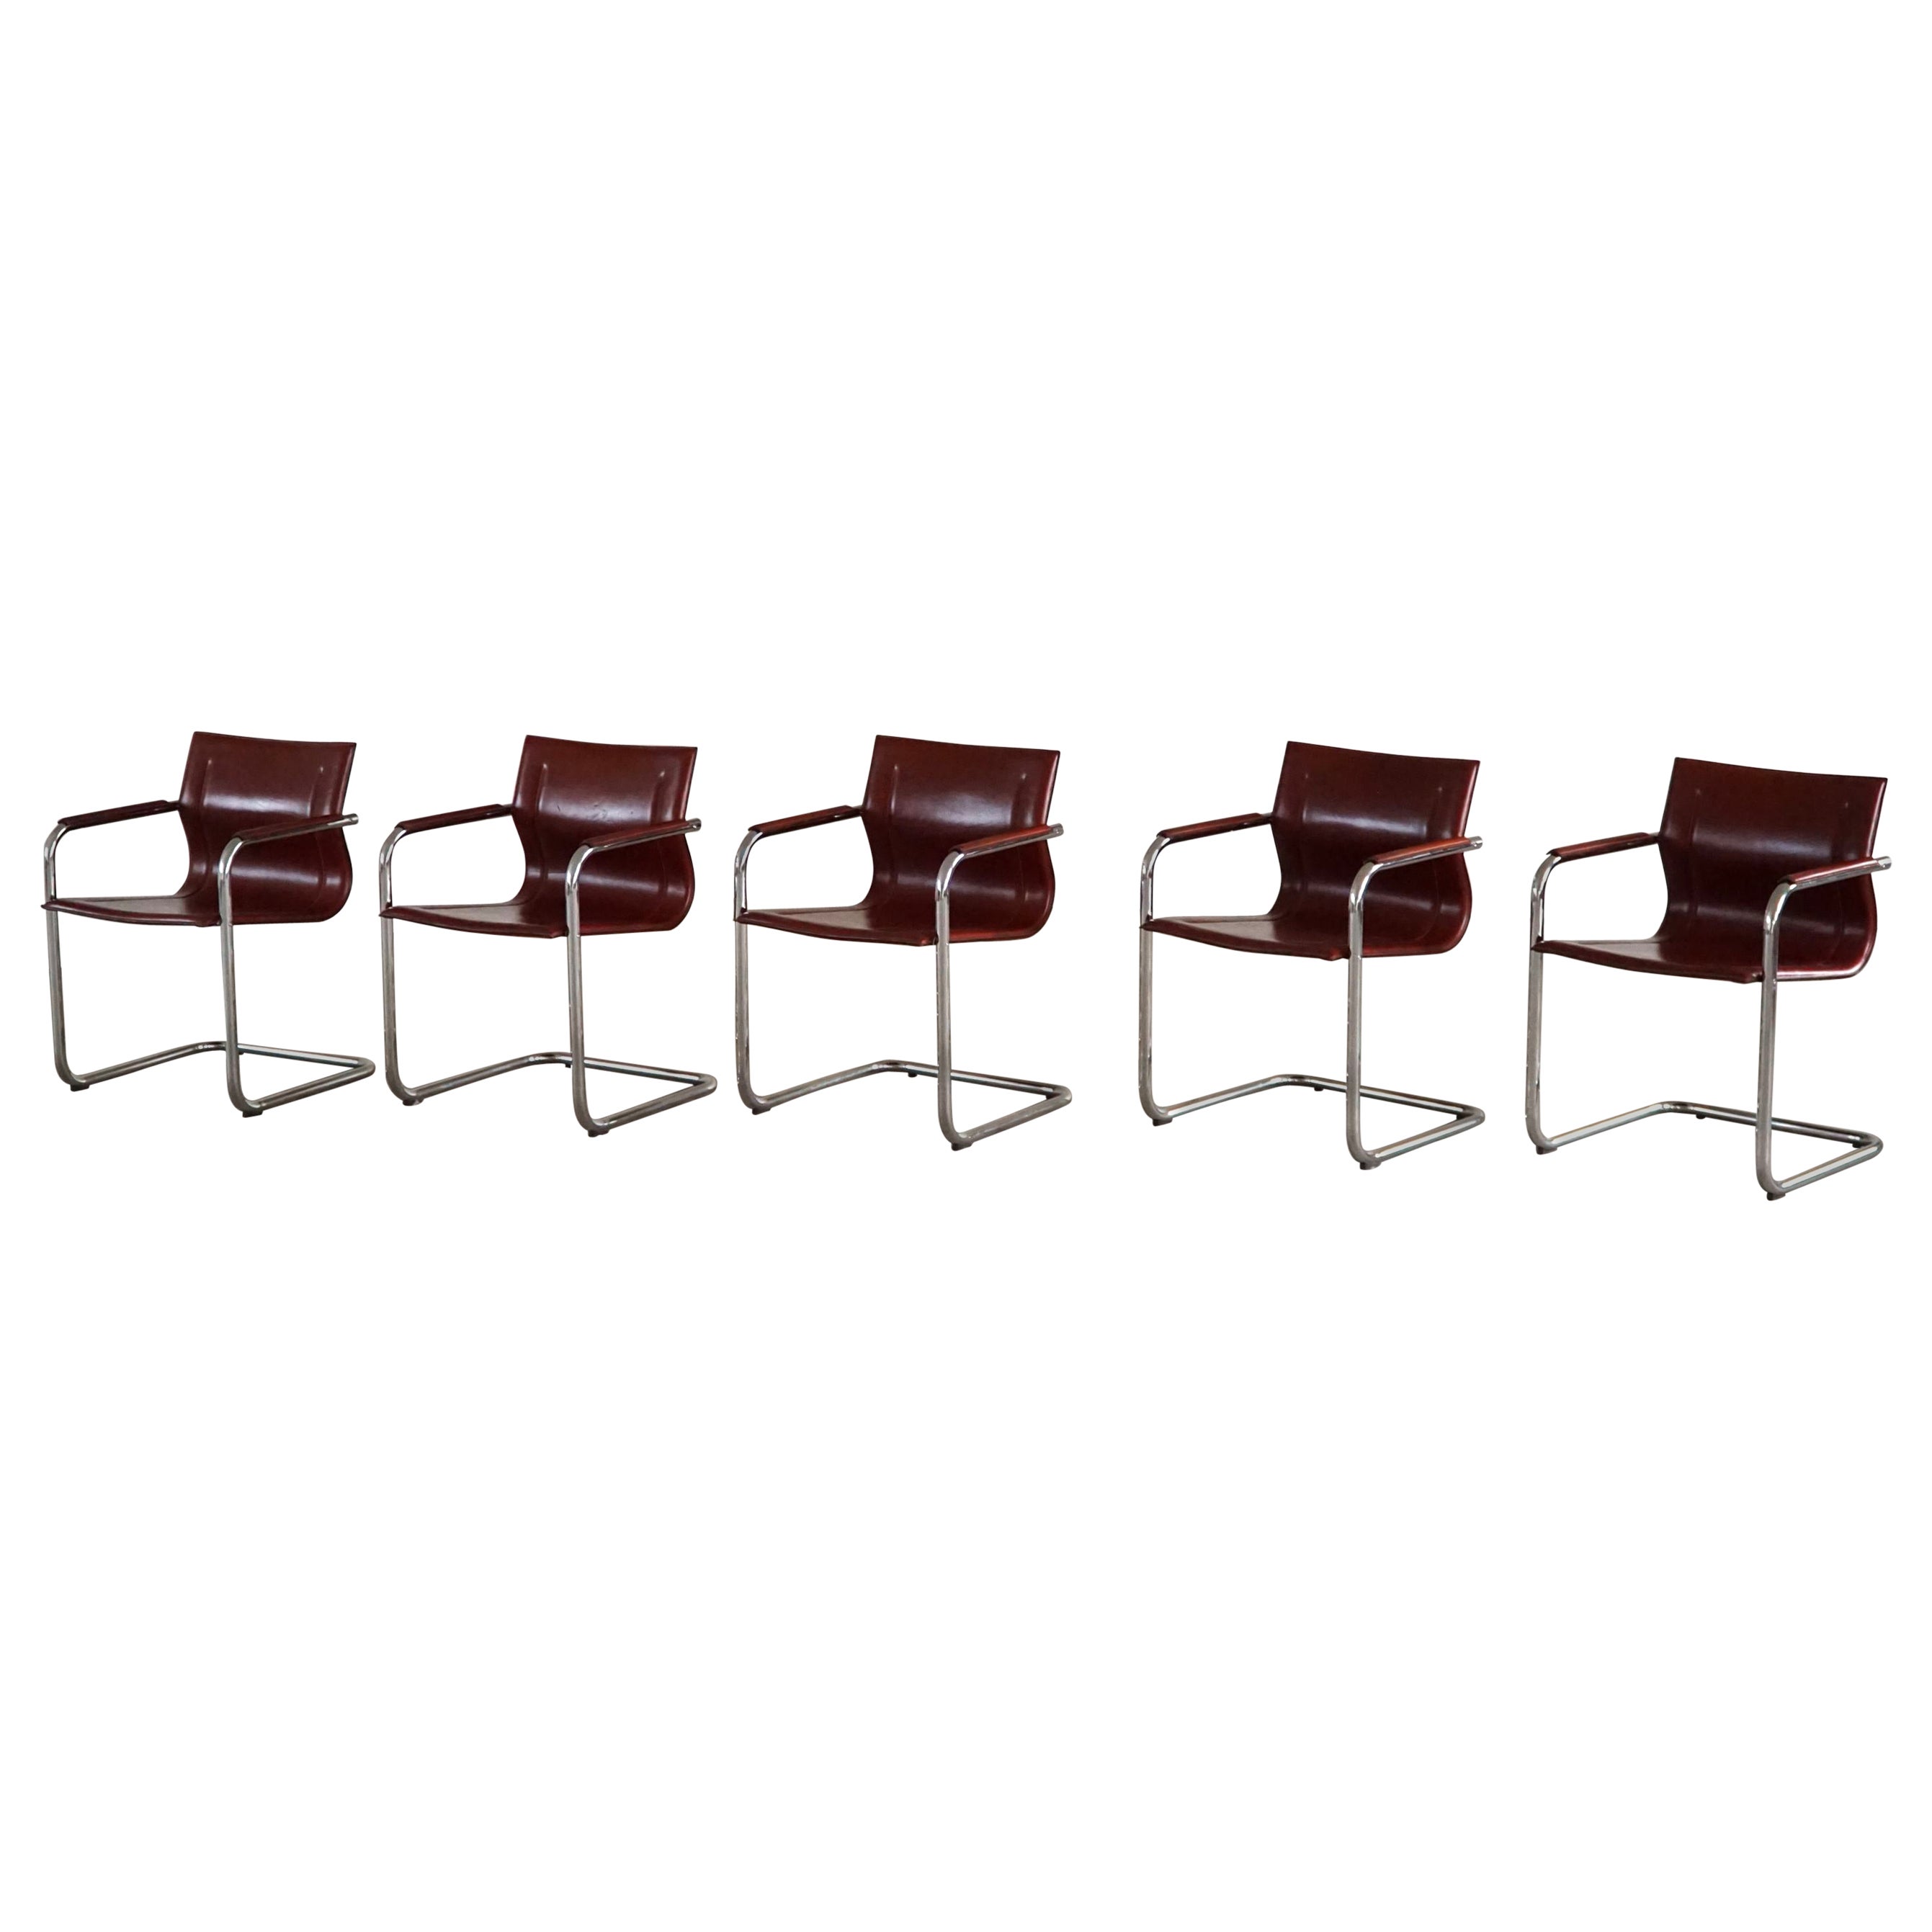 Set of 5 Cantilever Armchairs in Leather by Matteo Grassi, Model MG15, Italy 70s For Sale